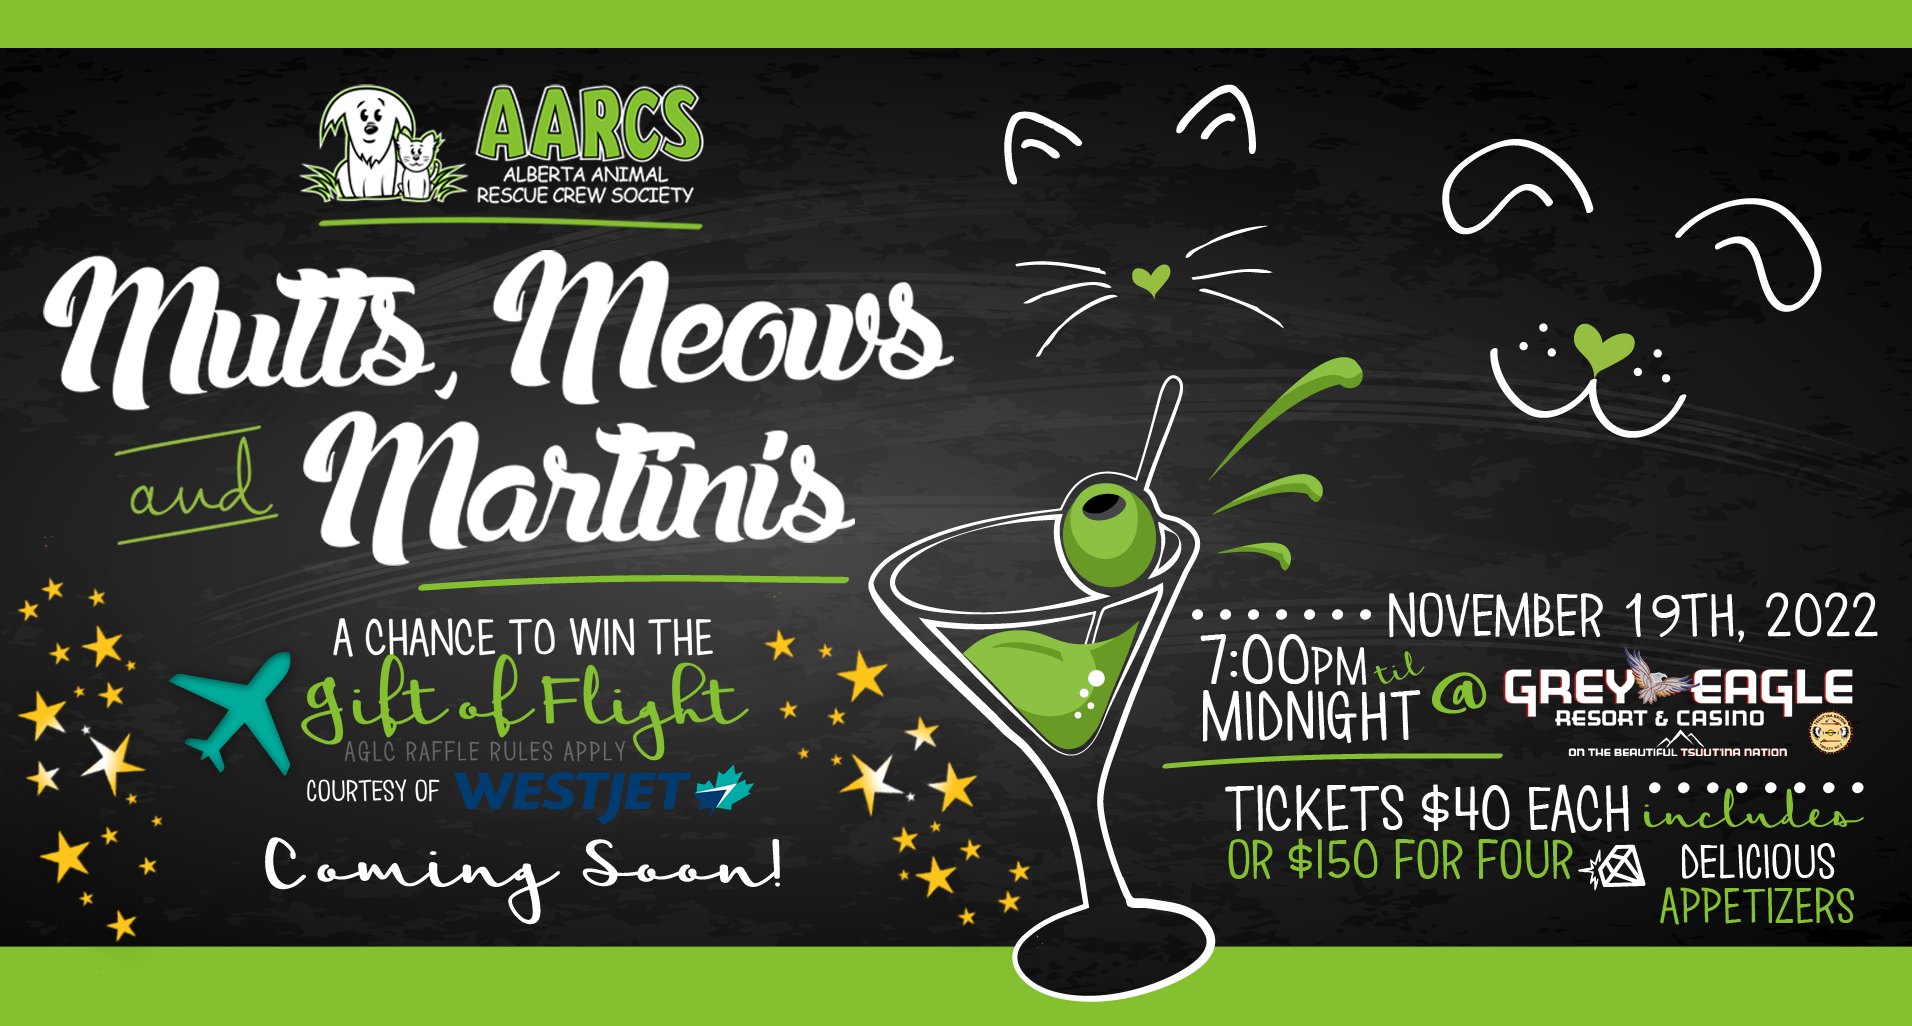 2022 Mutts Meows & Martinis AARCS Year End Celebration - AARCS